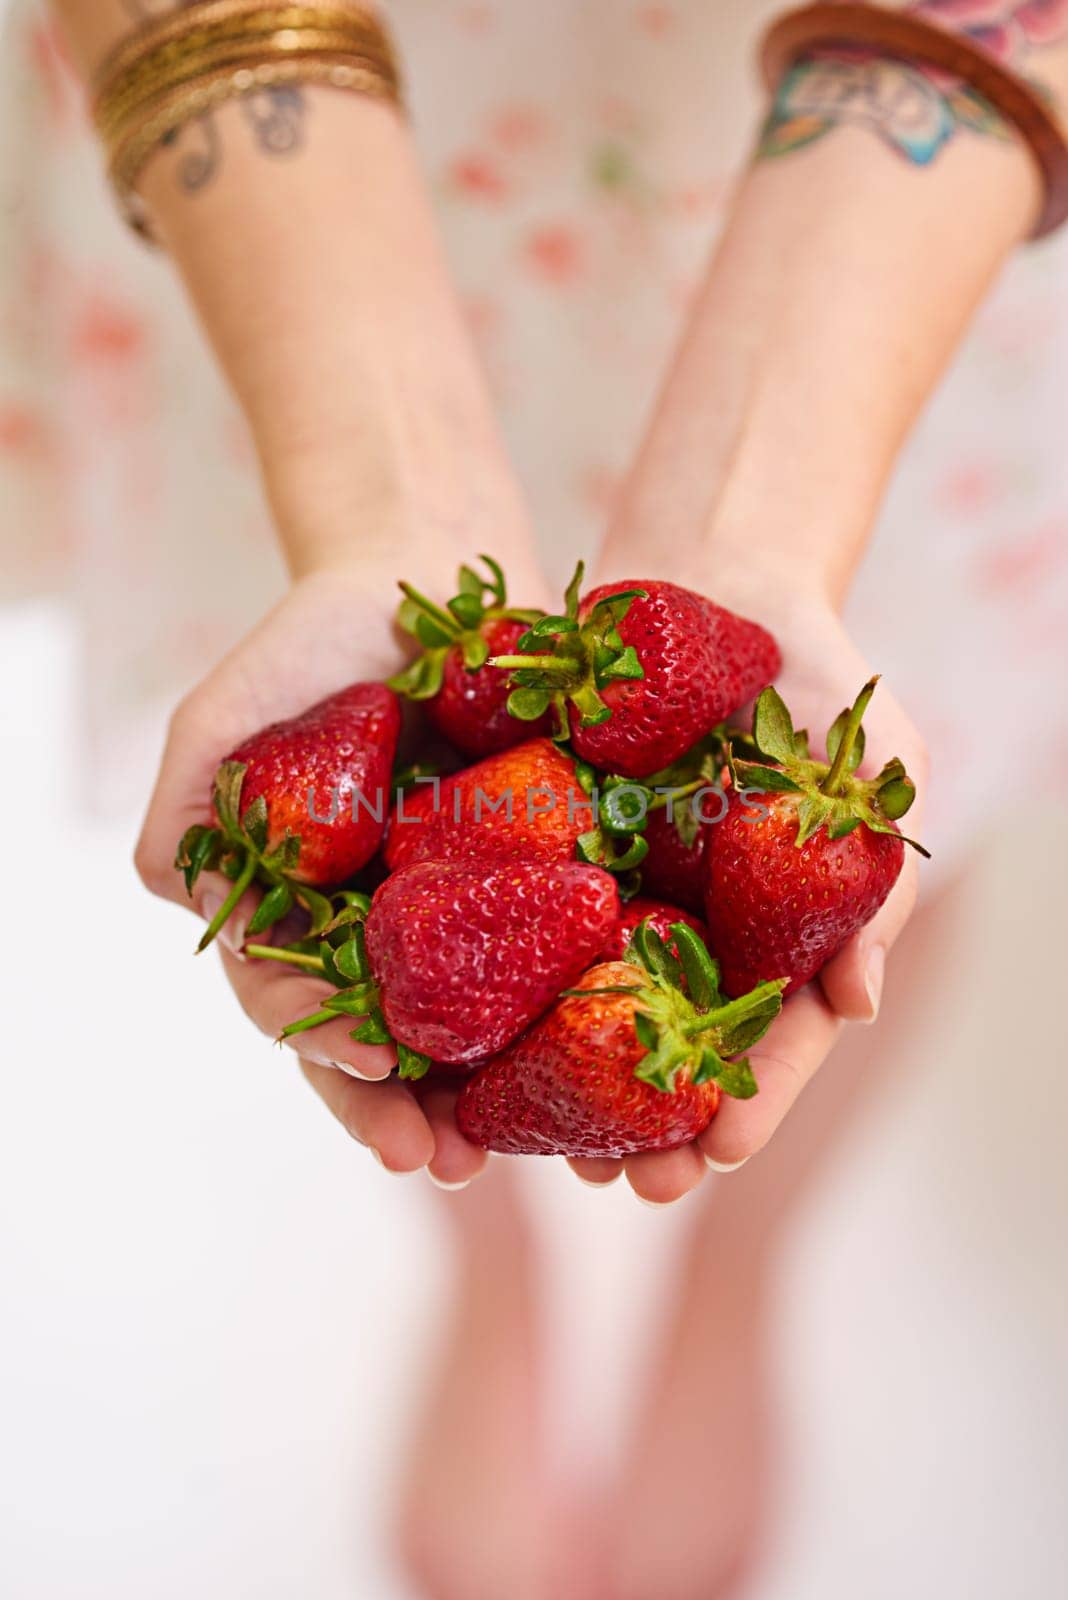 Healthy, strawberry and woman hands with fruit as vegan for protein, organic and balanced diet by eating nutritious snacks. Person, fresh and natural ingredients with vitamin from farming plantation.